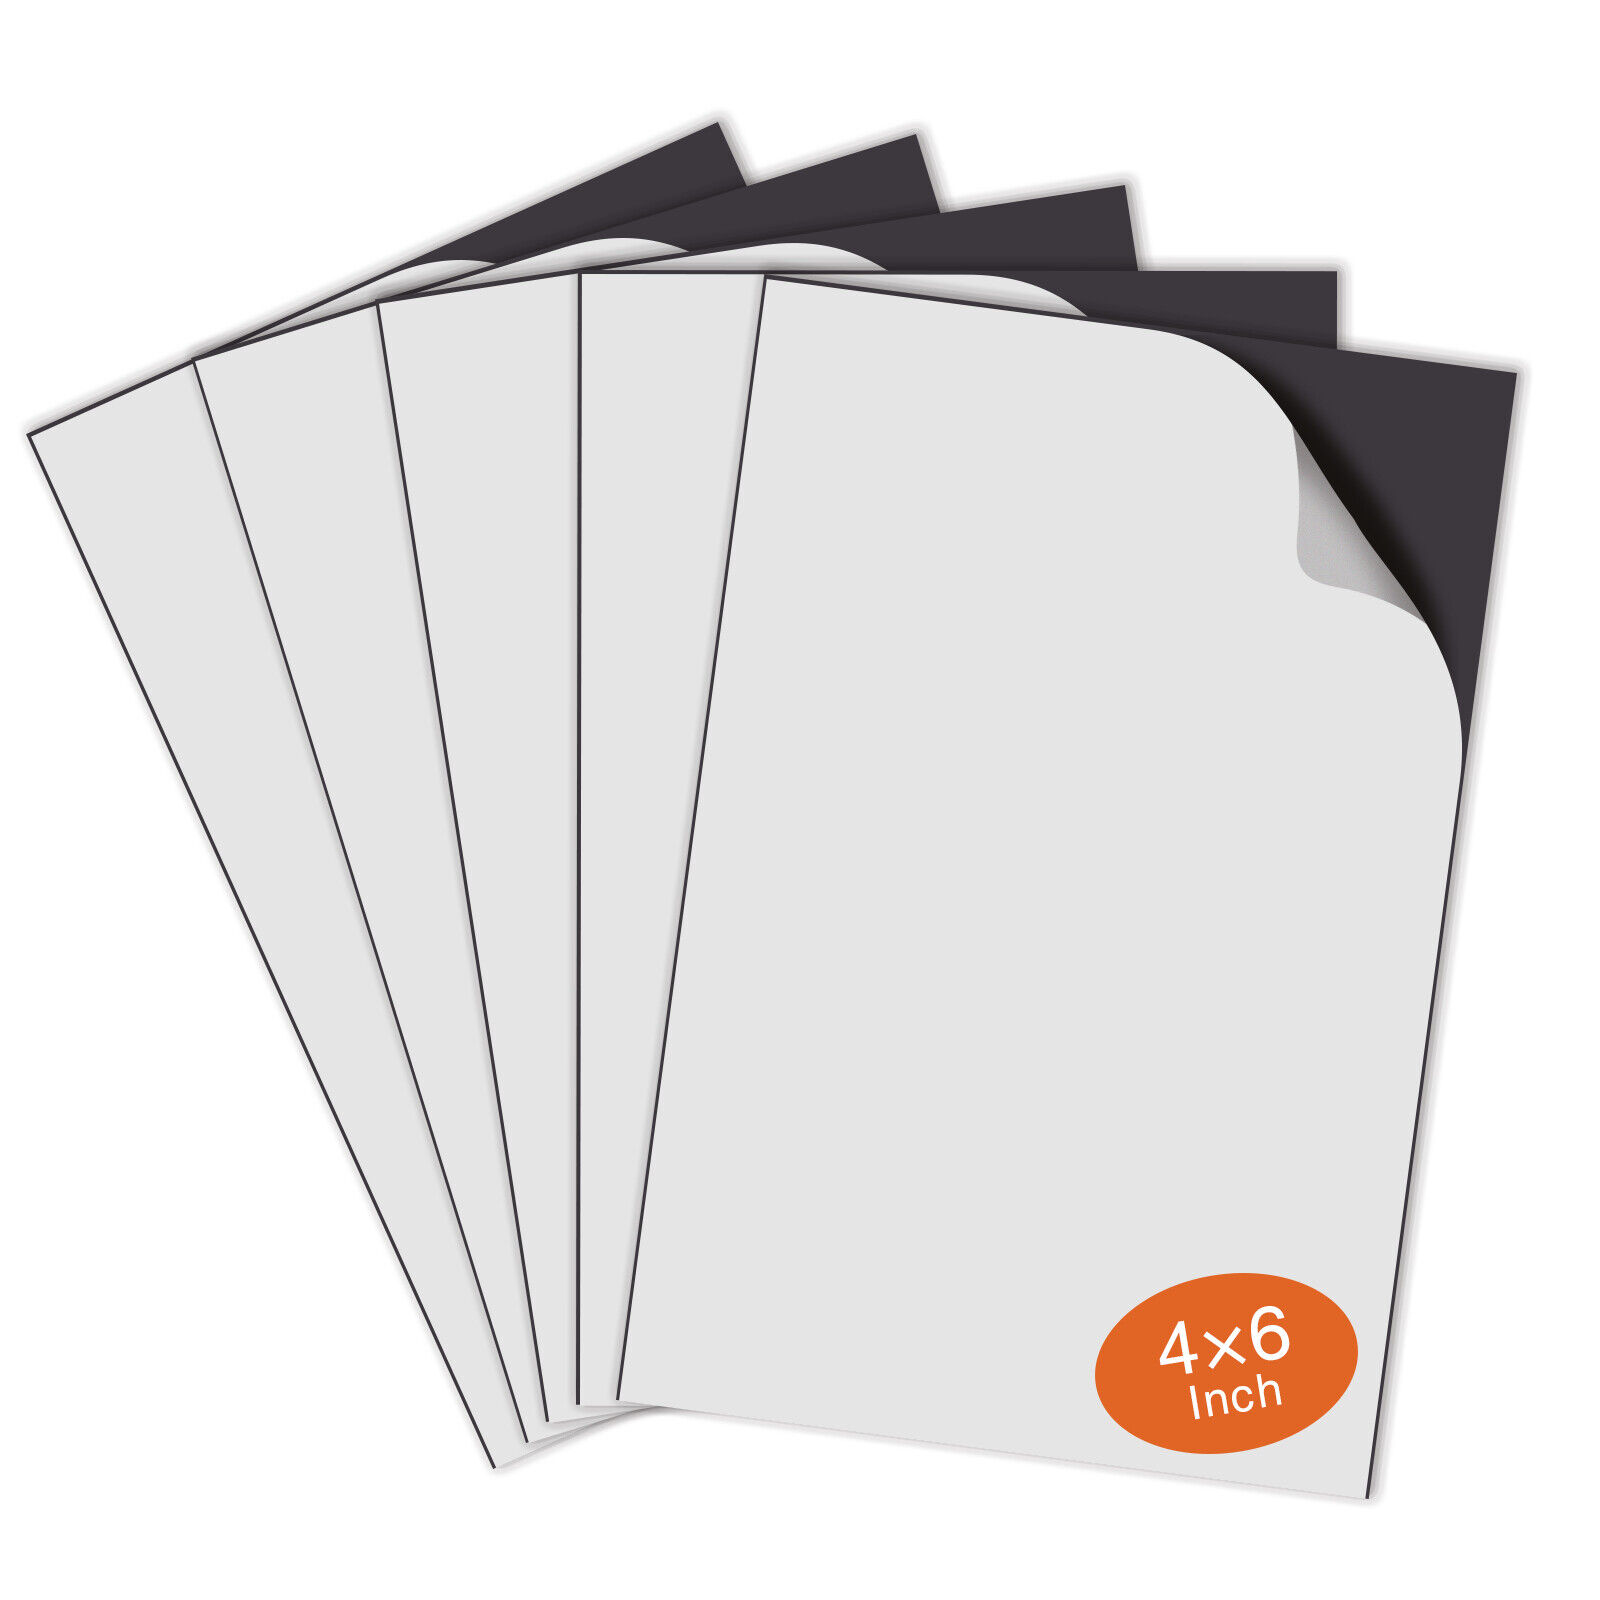 Lot 12-75 Strong Self Adhesive Magnetic Sheets 8.5x11 8X10 4X6 12 Mil - 20 Mil